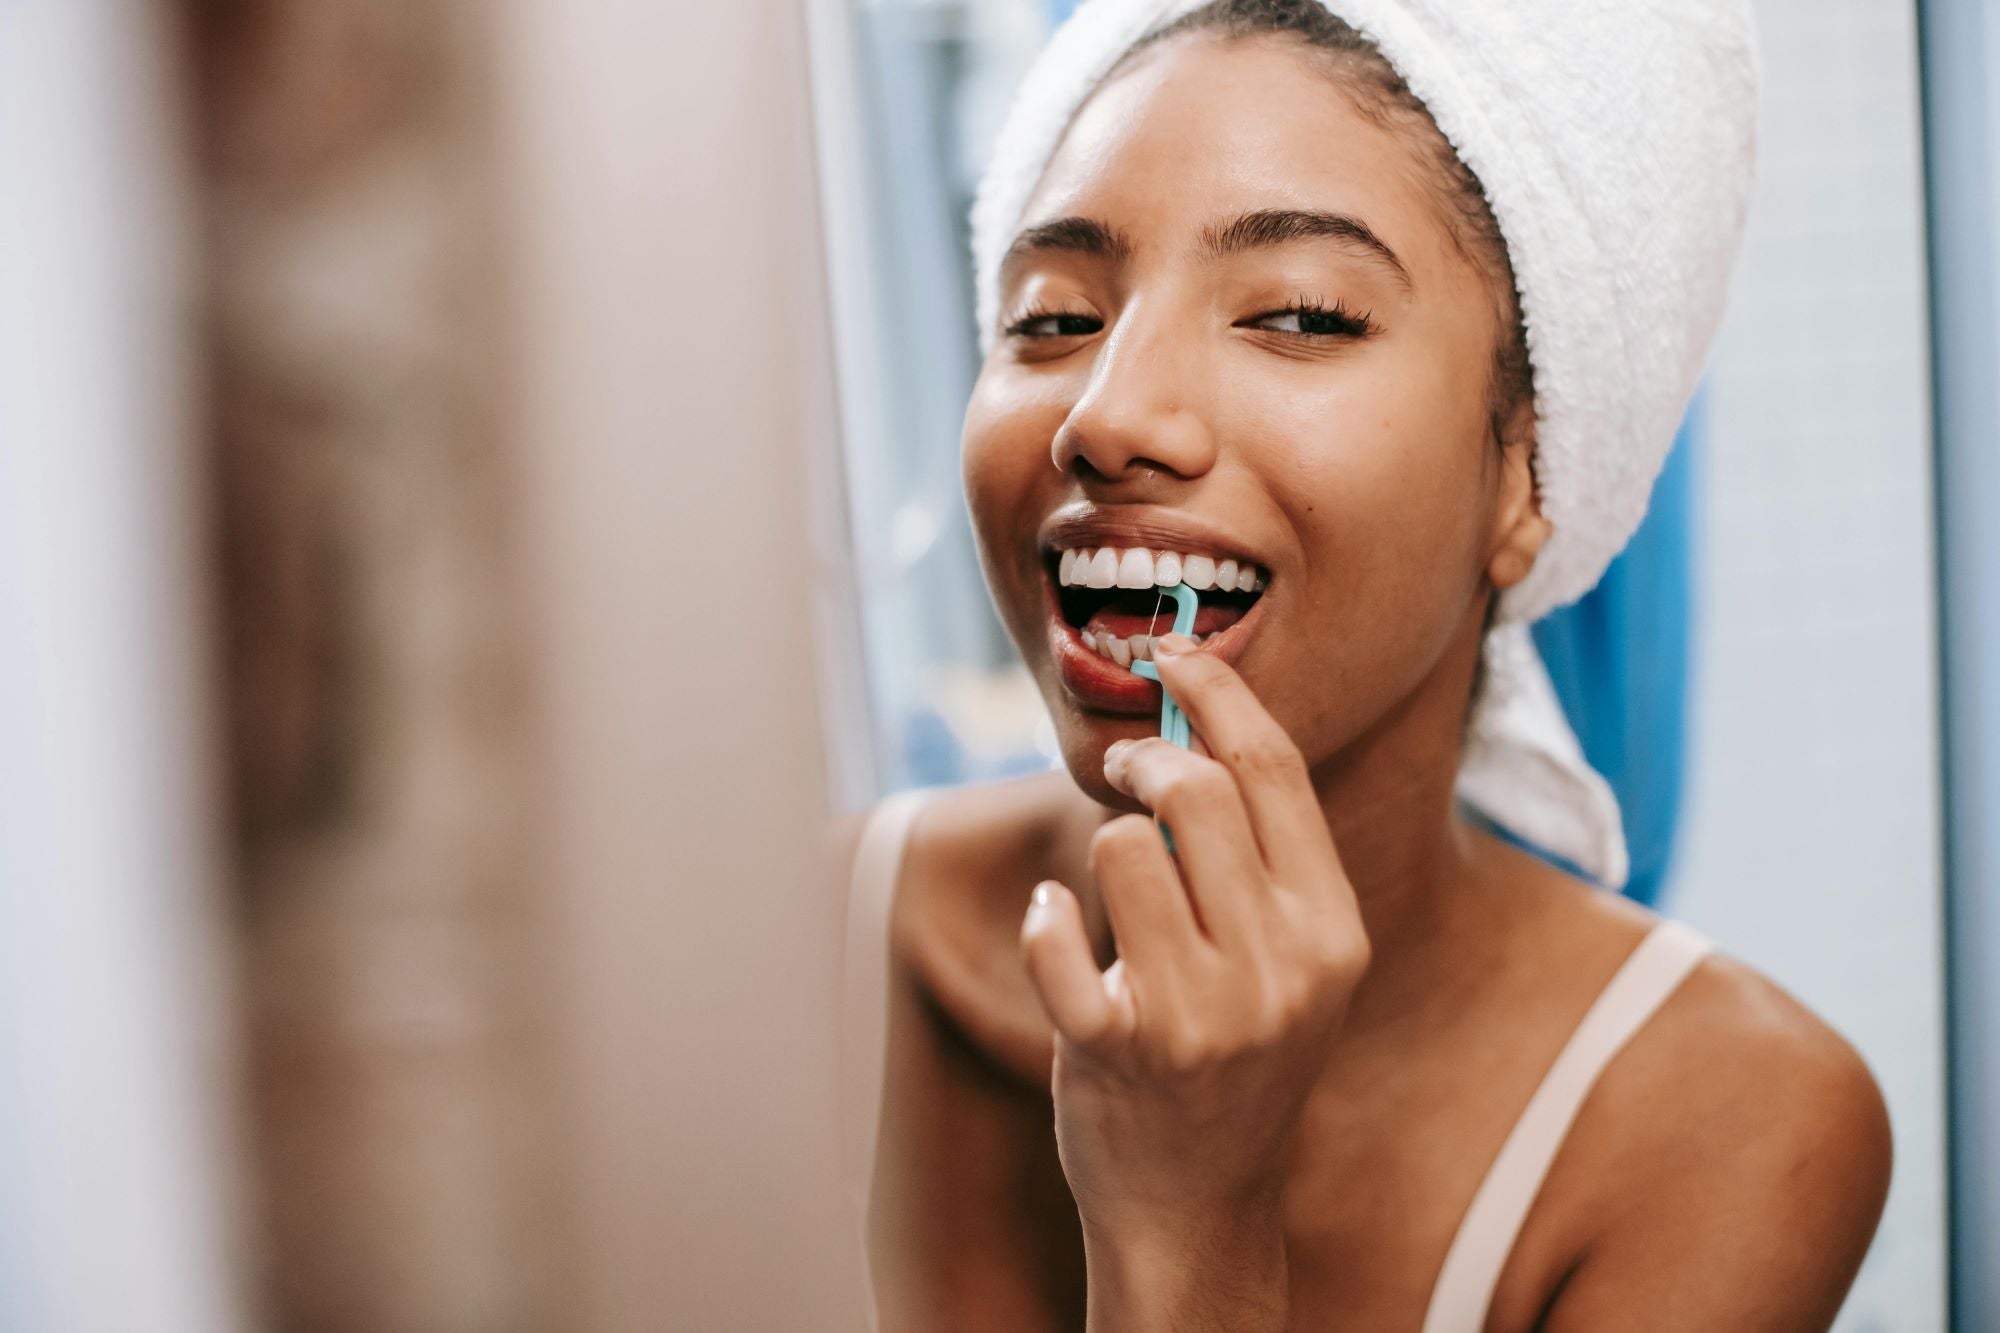 How to Whiten Teeth Naturally at Home